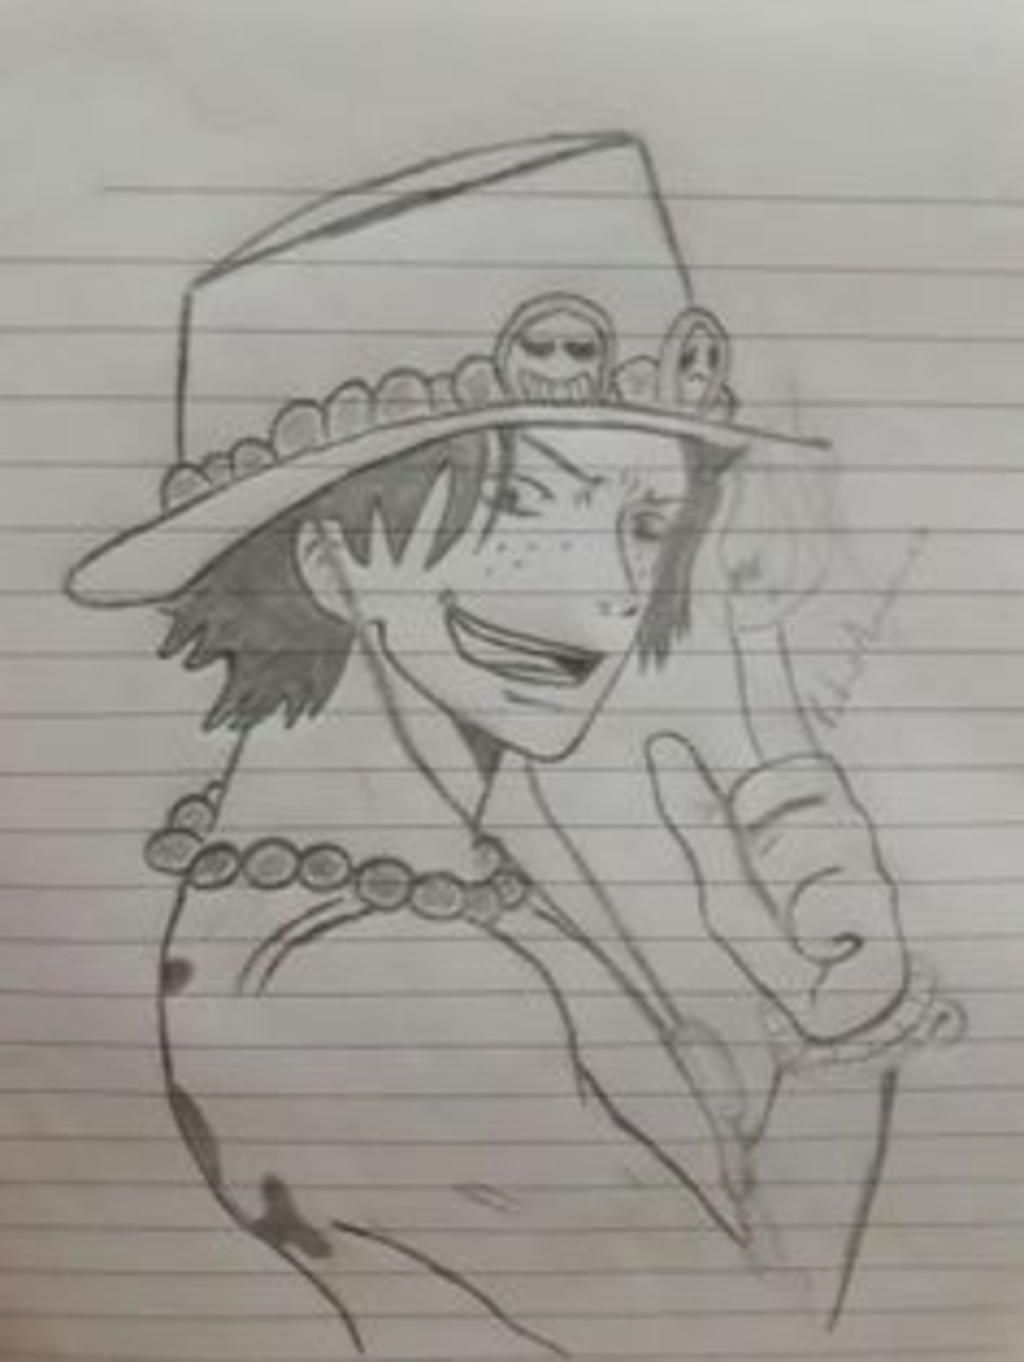 Vẽ Ace Hỏa Quyền trong One Piece  Drawing PORTGAS D ACE from One Piece   YouTube